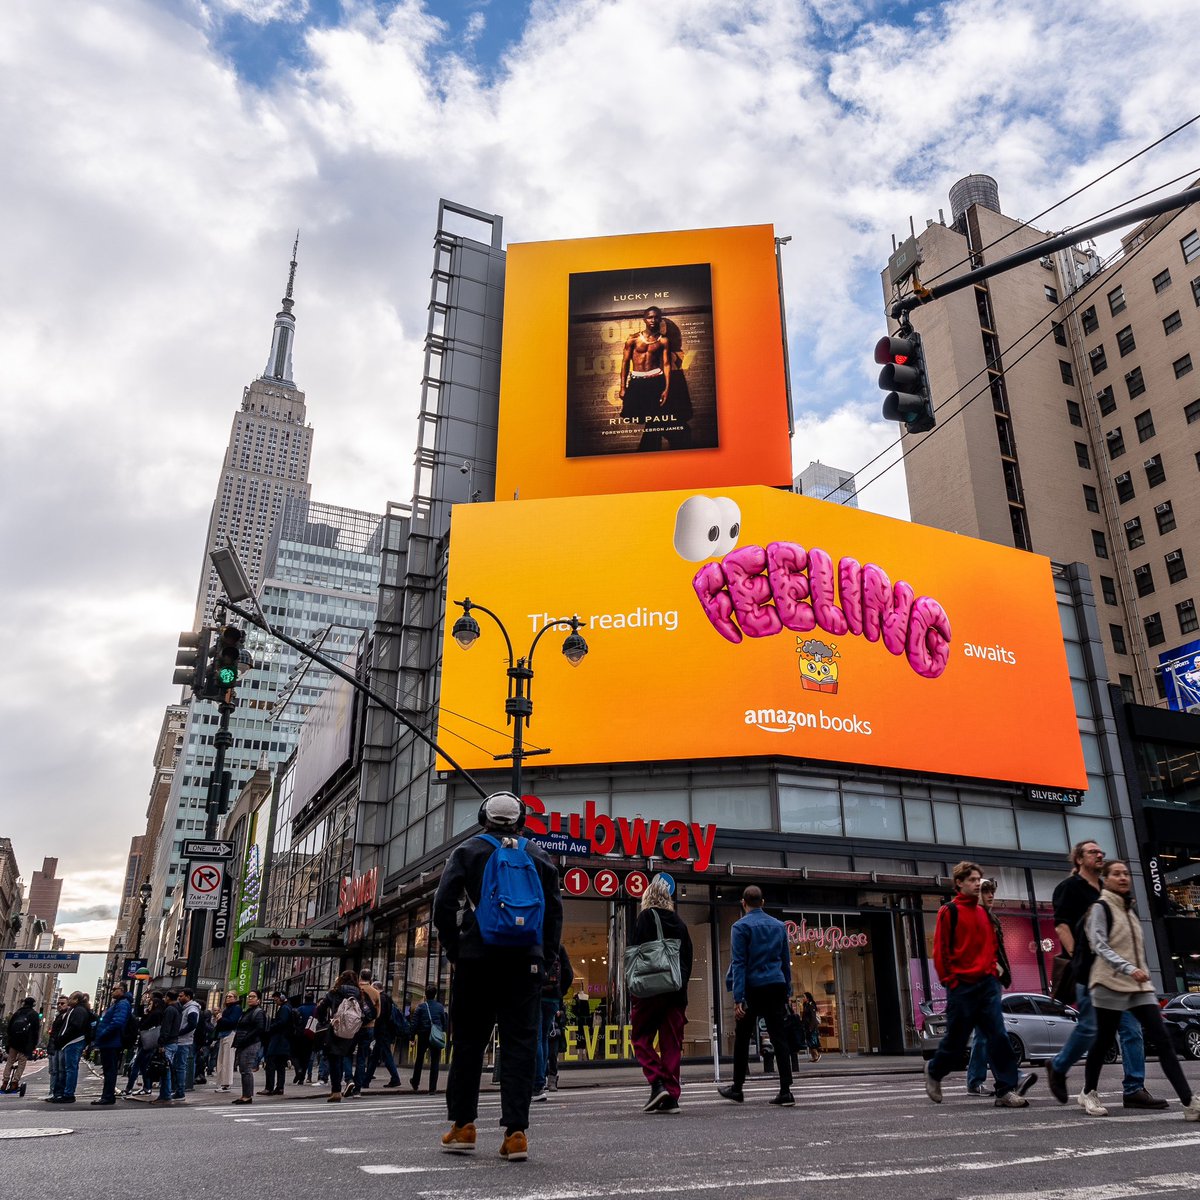 HUGE! Lucky Me is on the @amazonbooks billboard in NYC! 

Discover Rich Paul's new book at amzn.to/3FkPT2Y! #RocLit101 #thatreadingfeelingawaits